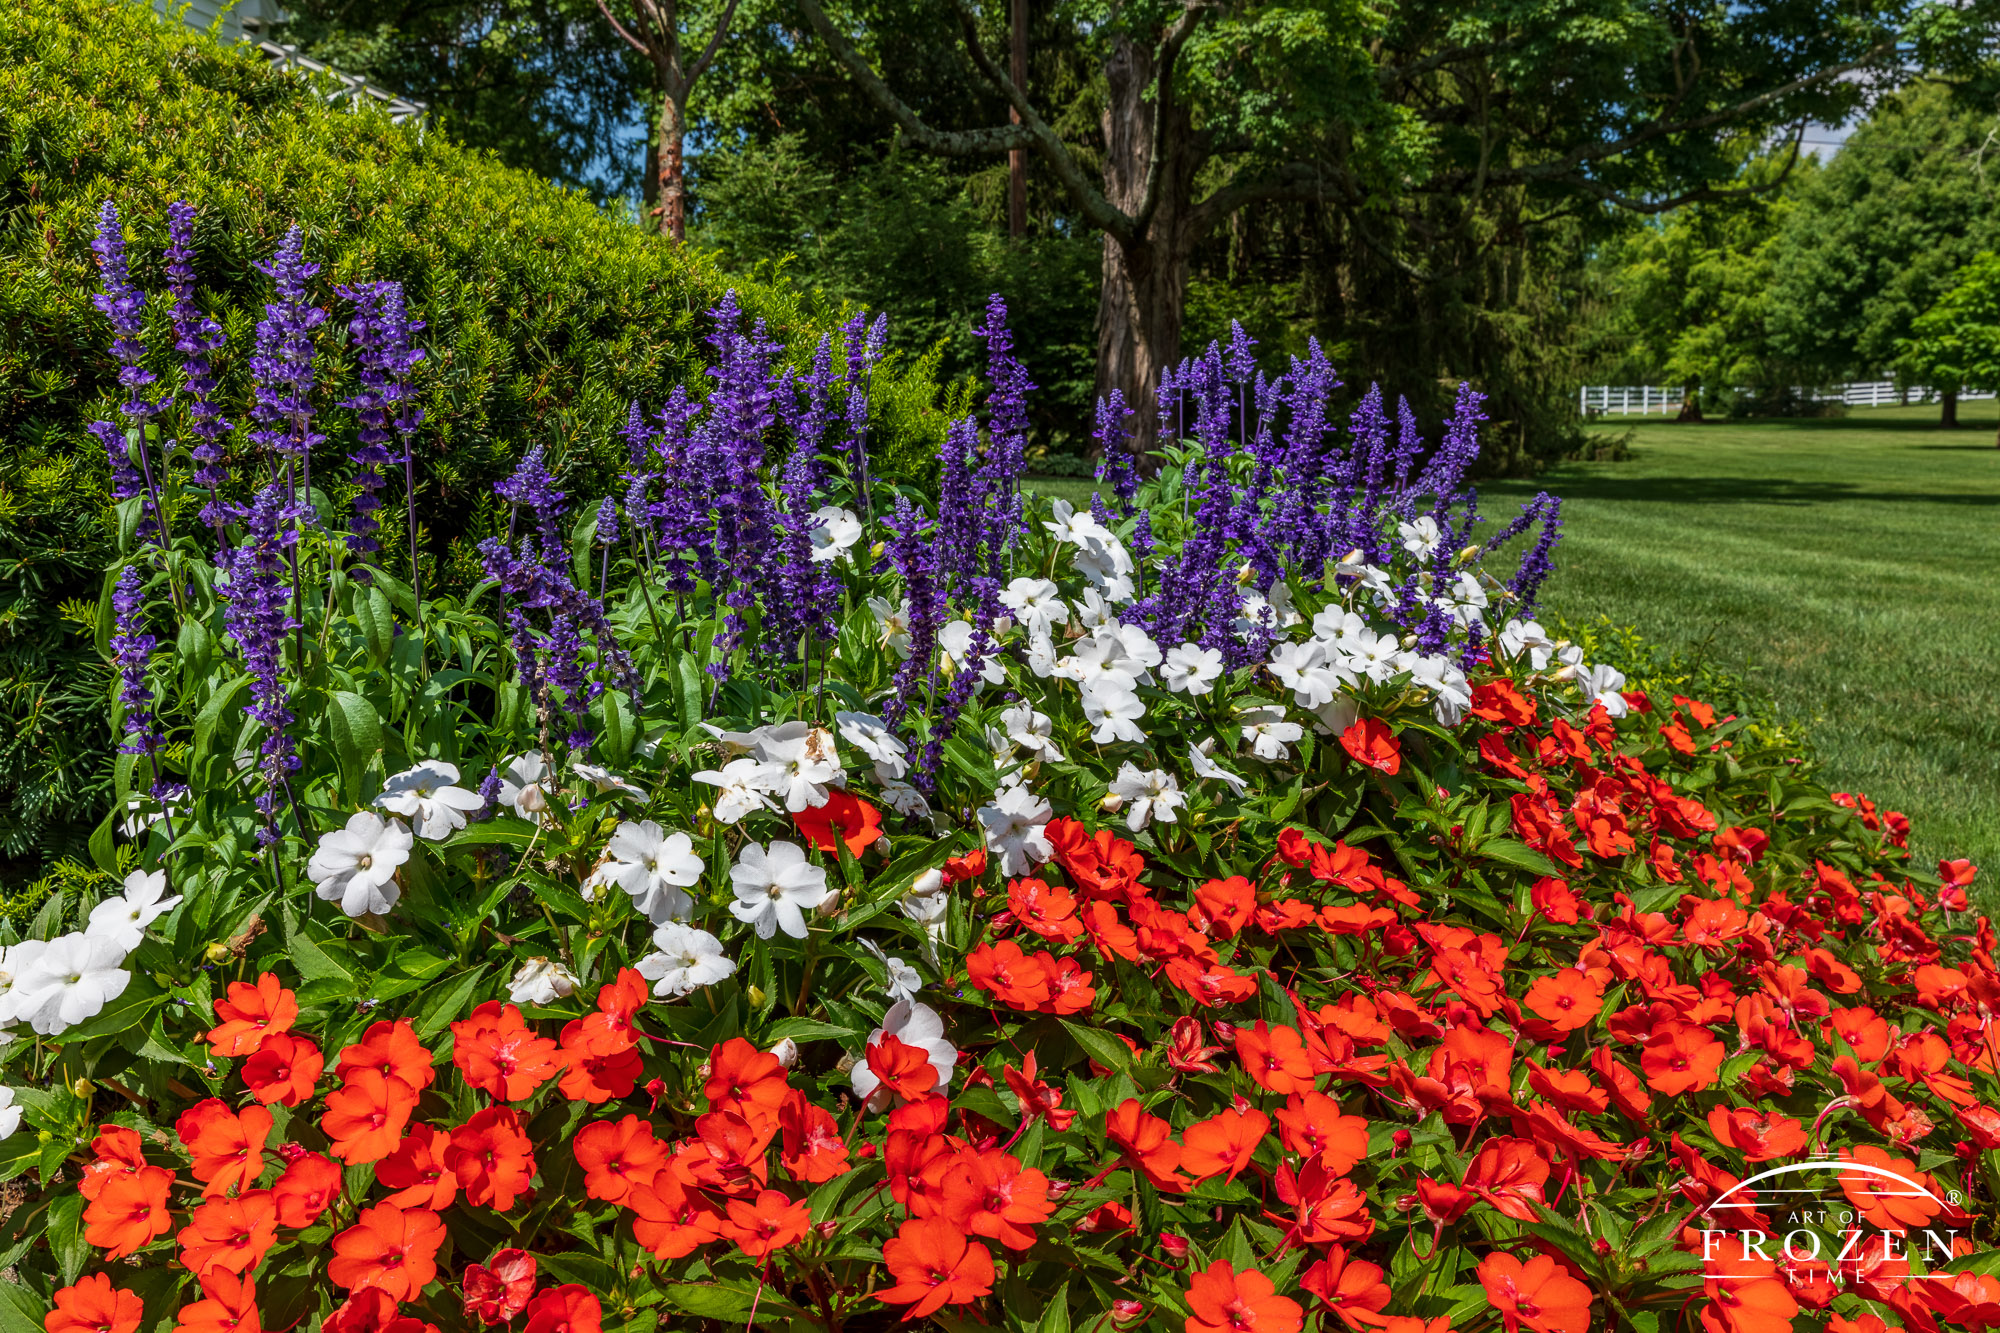 A patriotic flowerbed of red and white pansies along with purple salvia in front of Kettering Ohio’s Polen Farm.